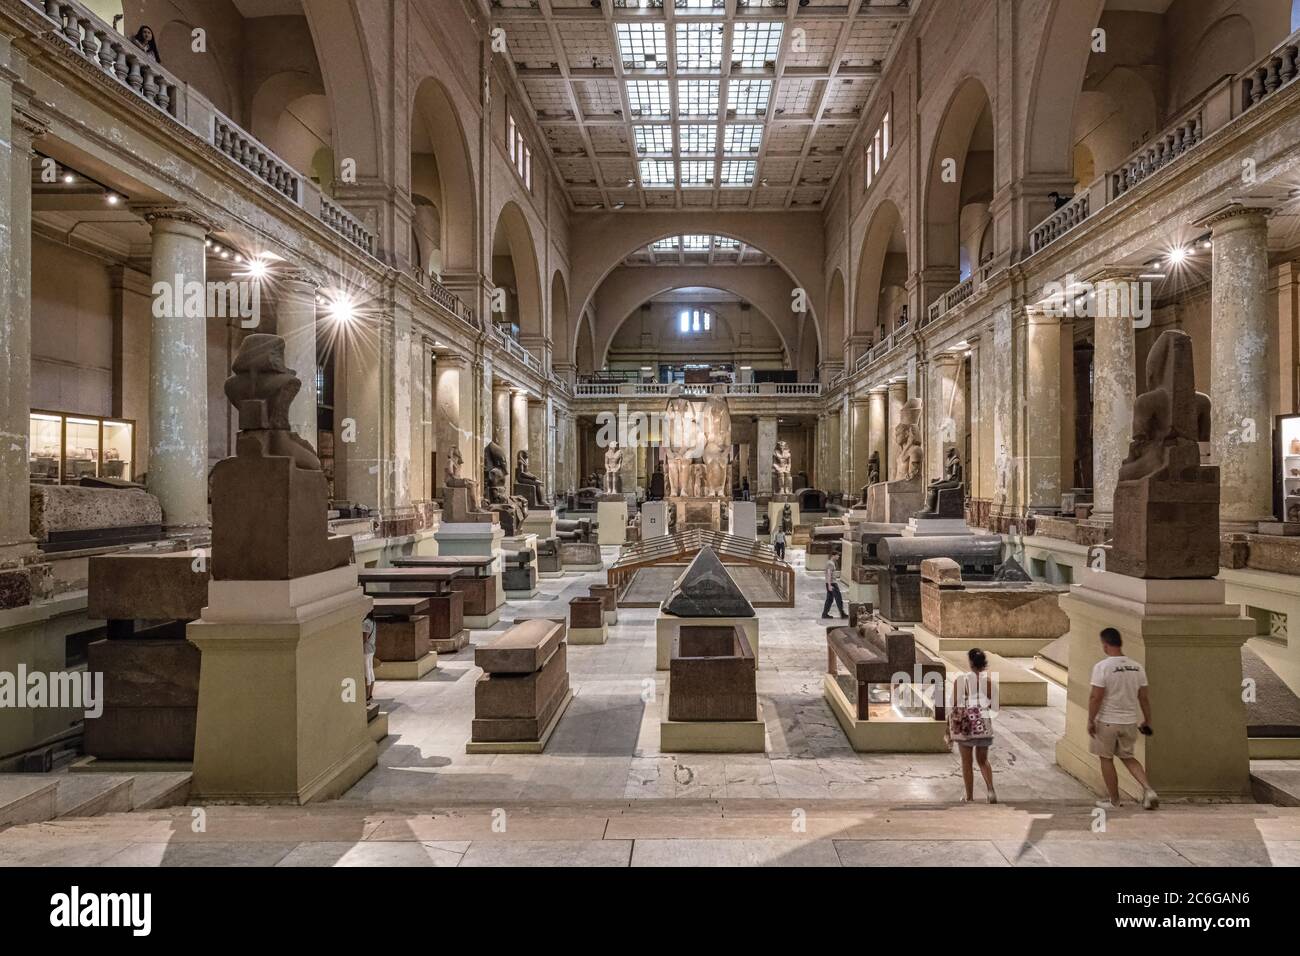 inside the central hall of the Egyptian Museum of Antiquities, Cairo, Egypt Stock Photo